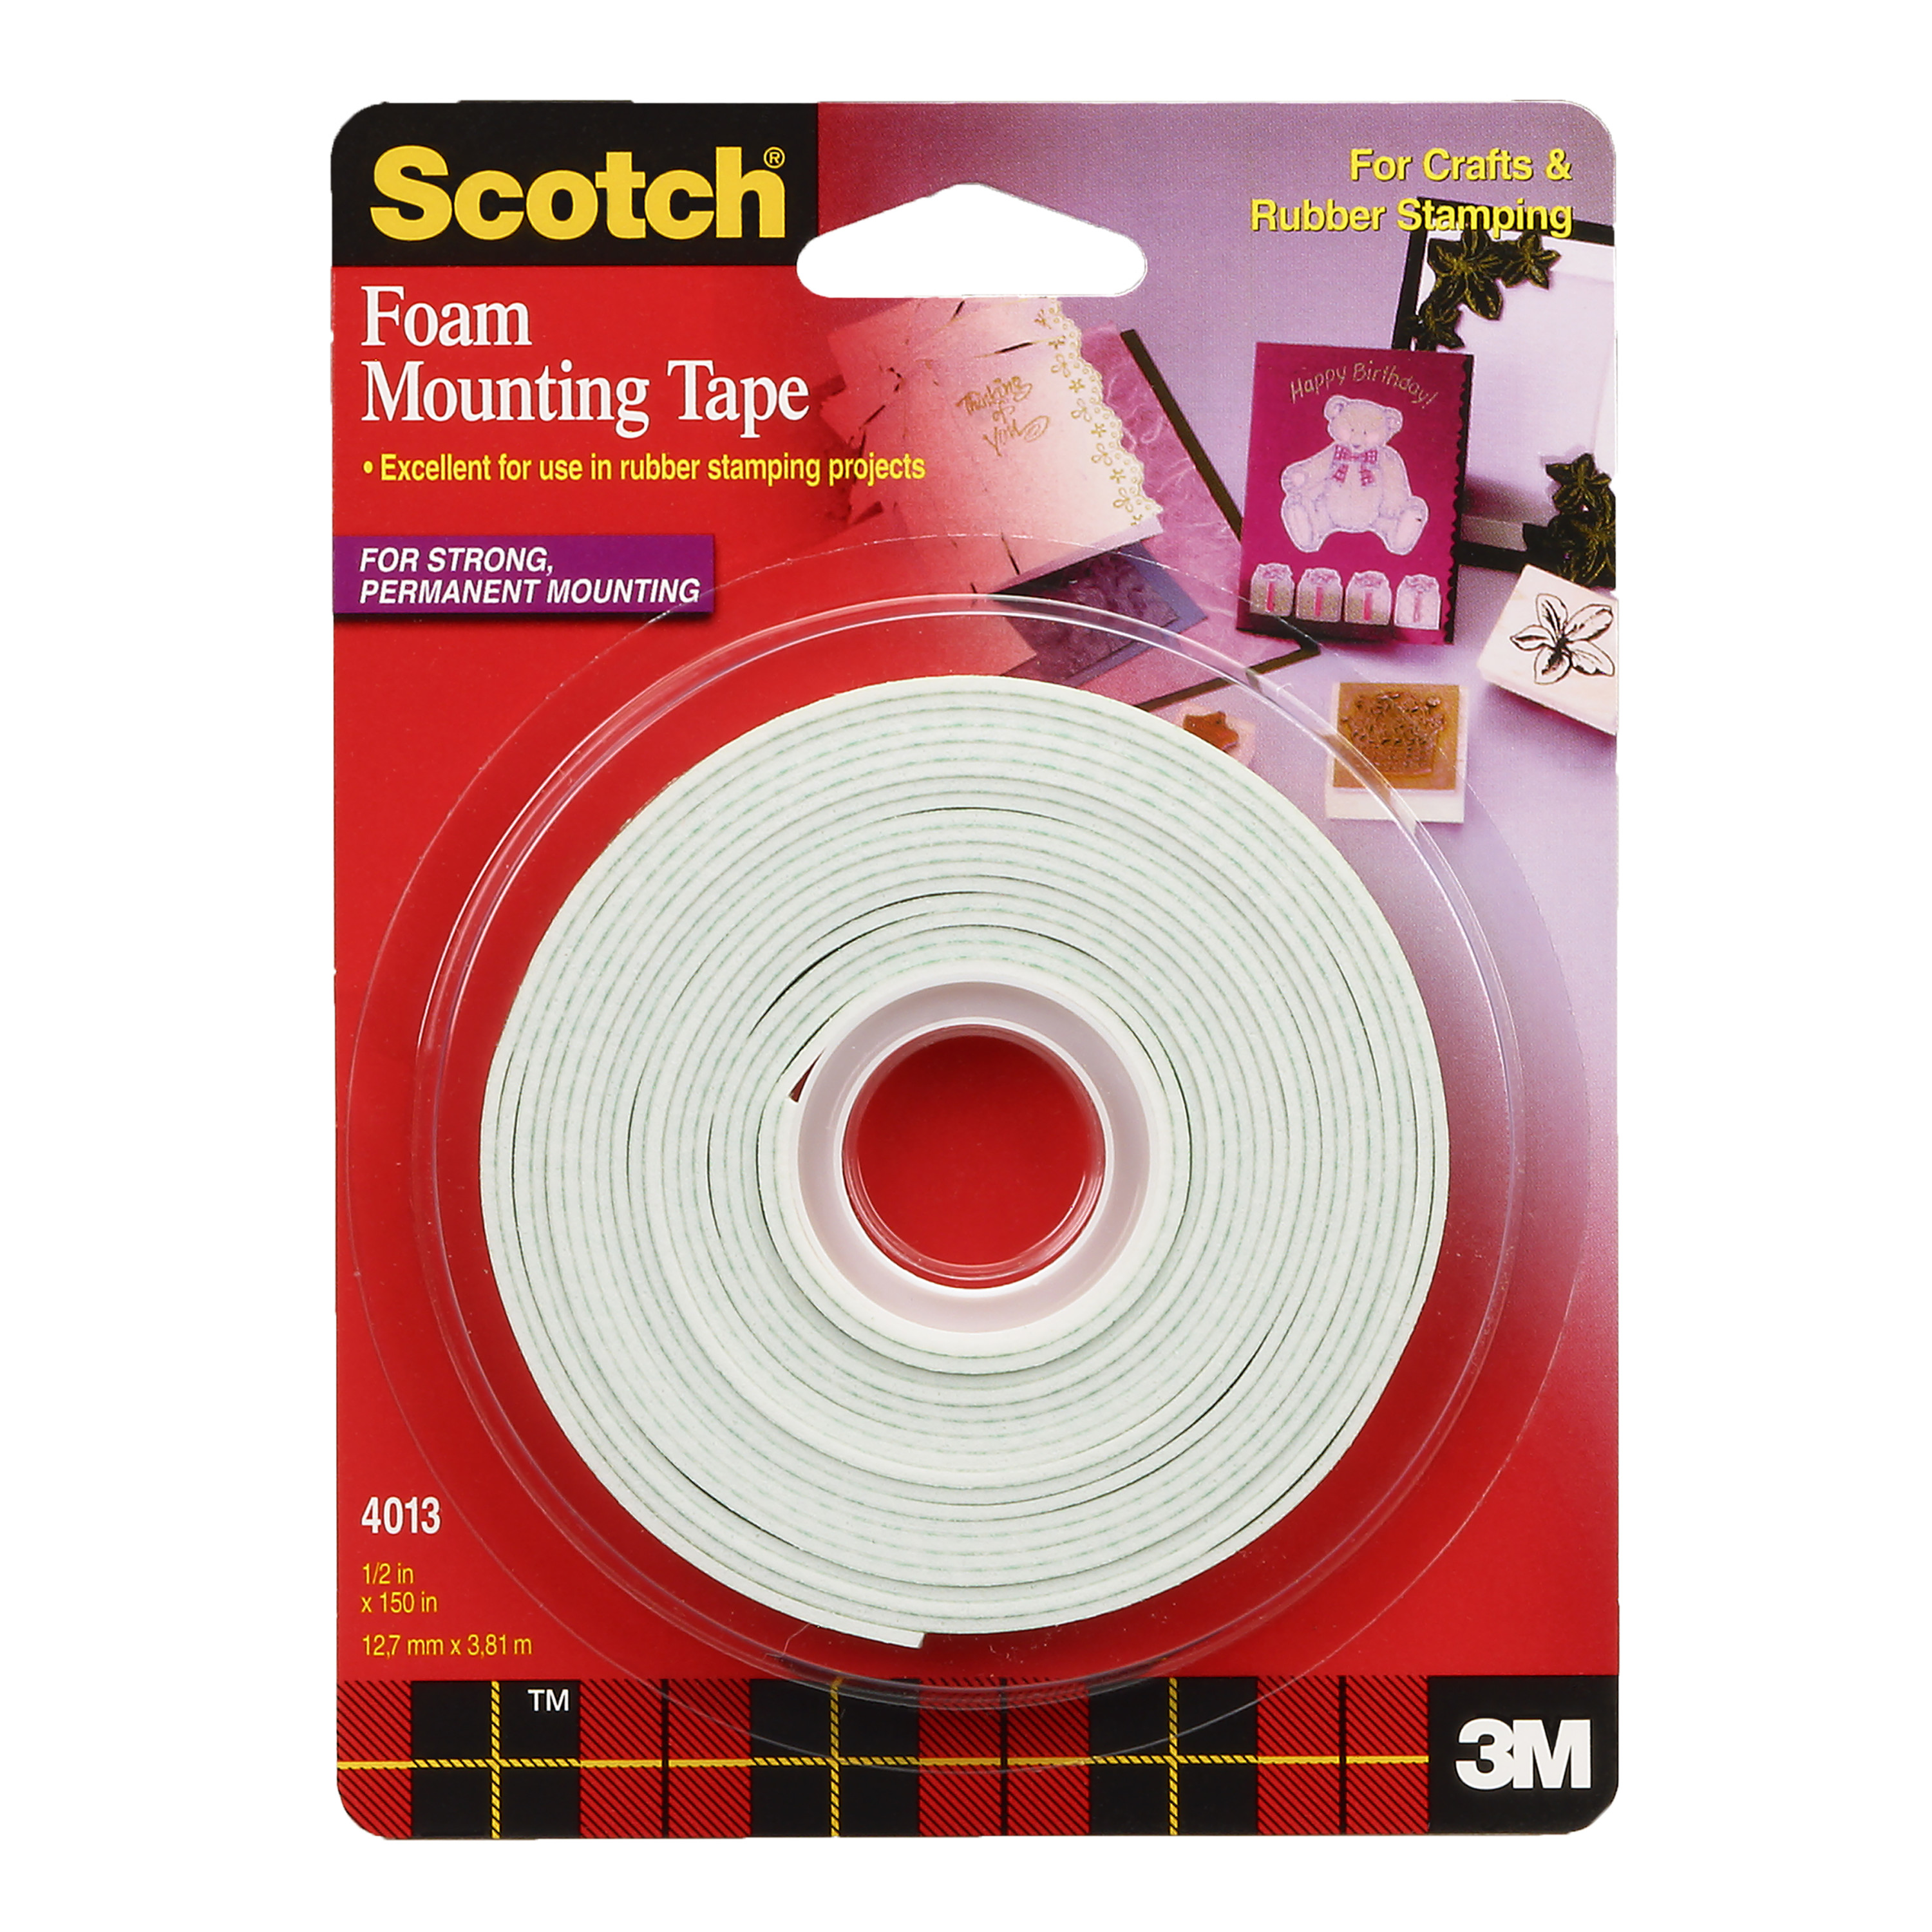 3M Scotch Craft Mounting and Rubber Stamping Foam Tape, 1/2" x 150" - image 1 of 2